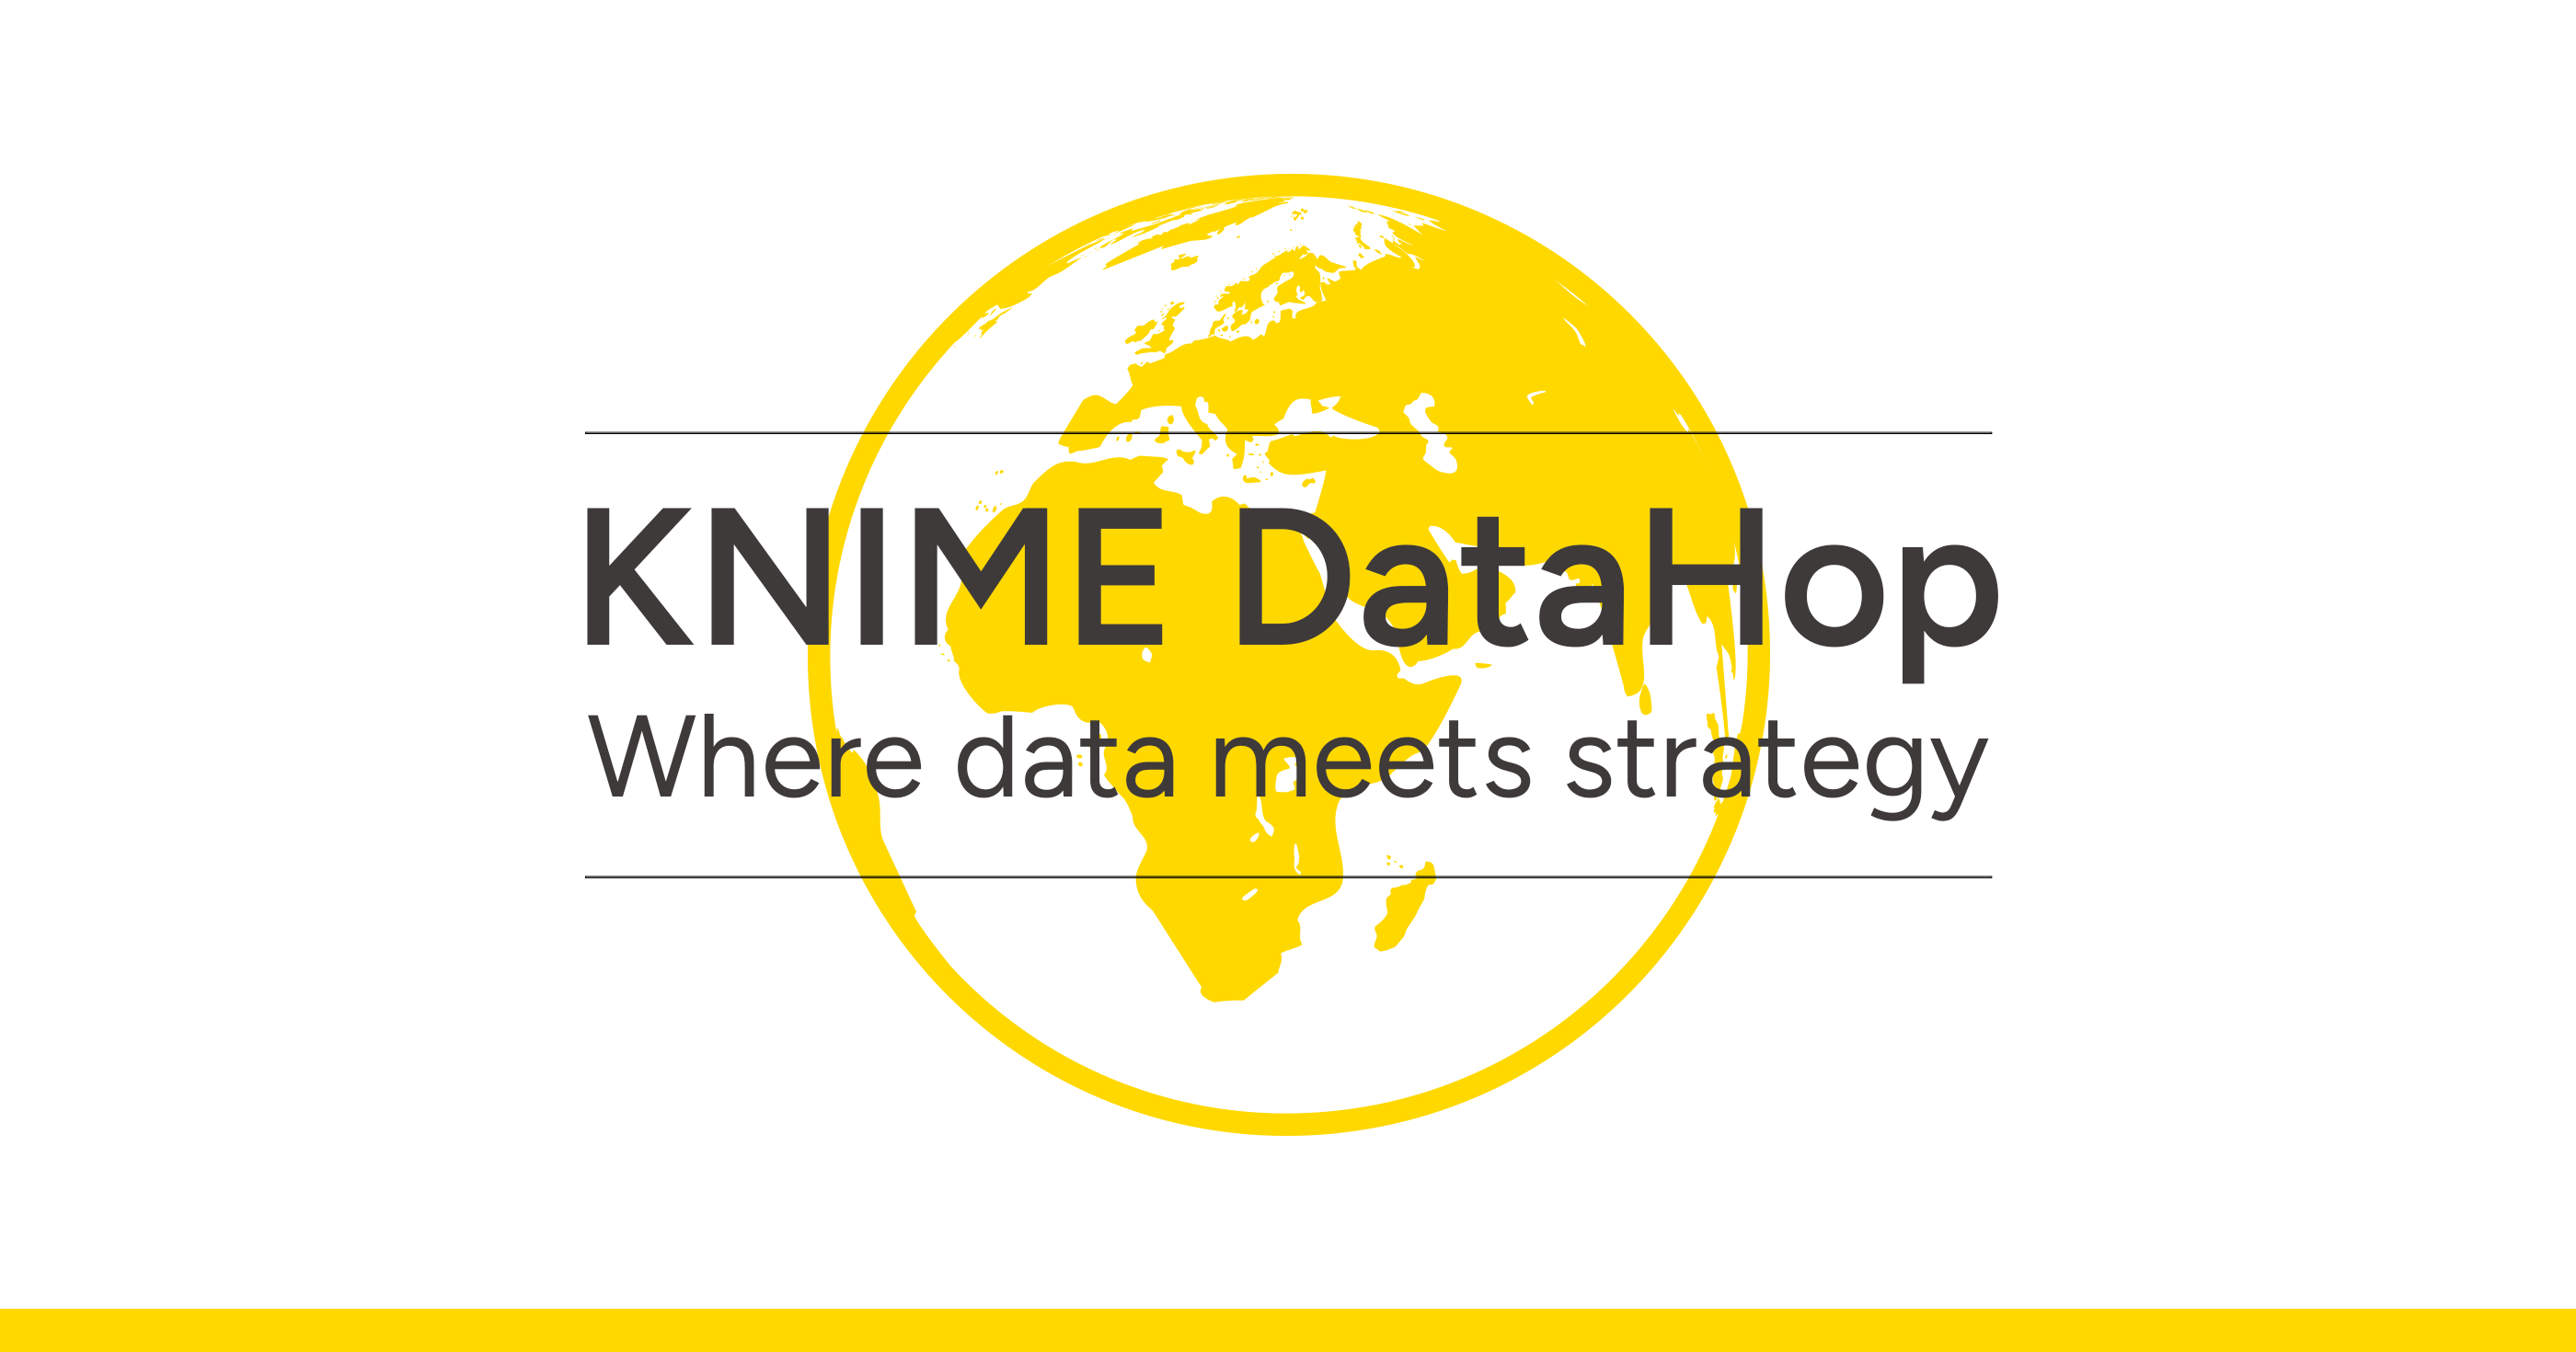 Find a KNIME DataHop near you